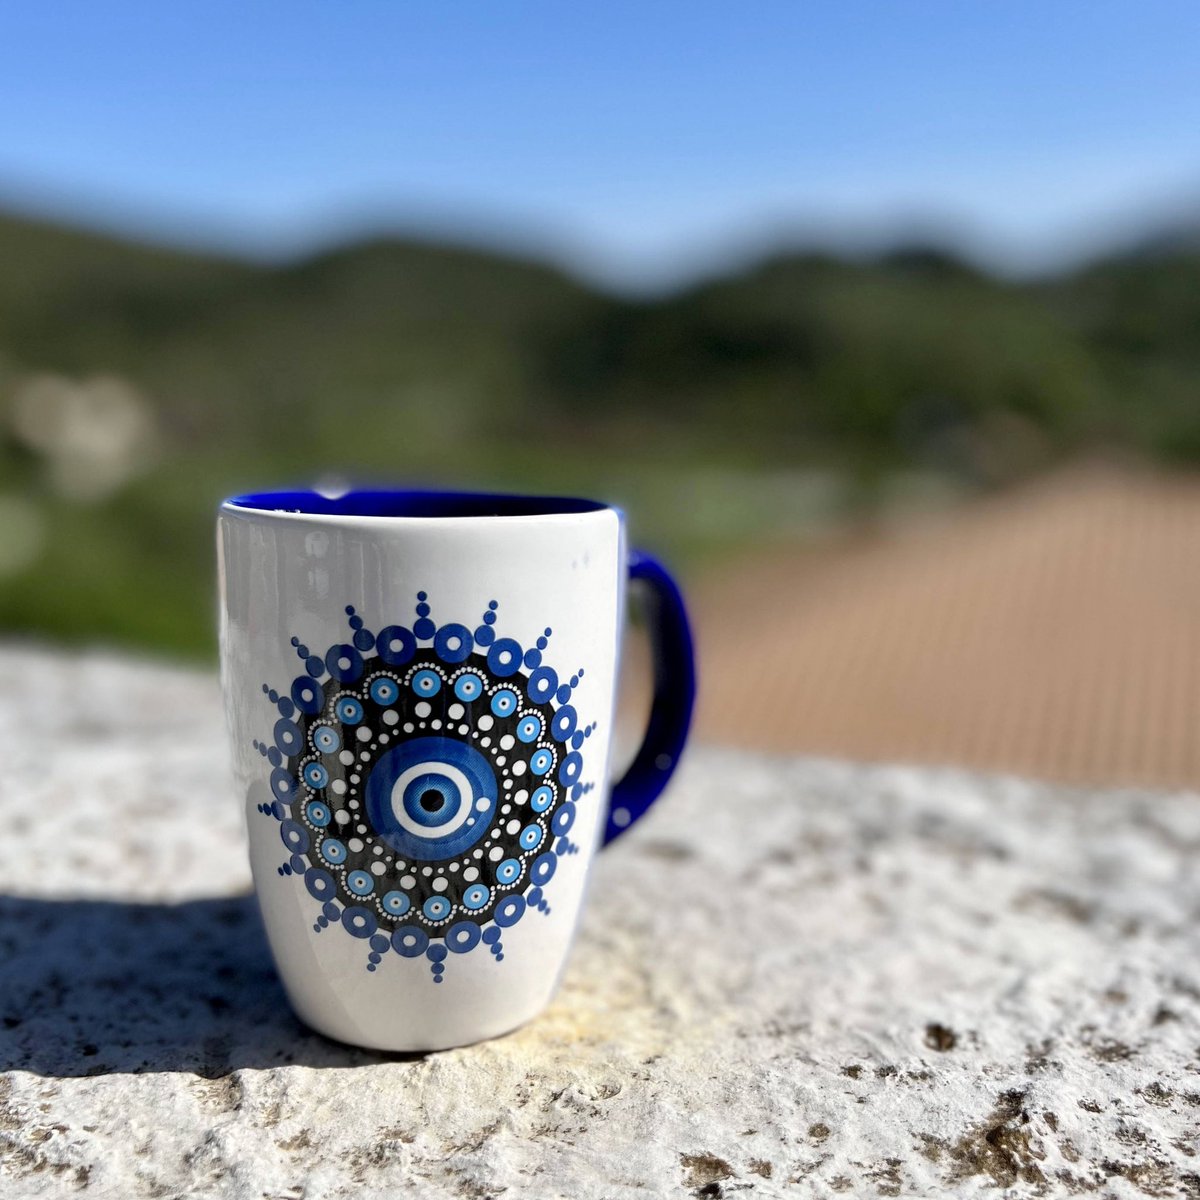 Good Luck Mantra Ceramic Coffee Mug!⚡️

Shop Now in Our Website Here
 ⬇️⬇️⬇️
zeusgreekcollection.com

#zeusgreekcollection #zeusgreek #zeus #zgk #mykonos #greek
#athens #jewerlystore #vintagejewelly #sales #fallsales
#etsystore #etsystock